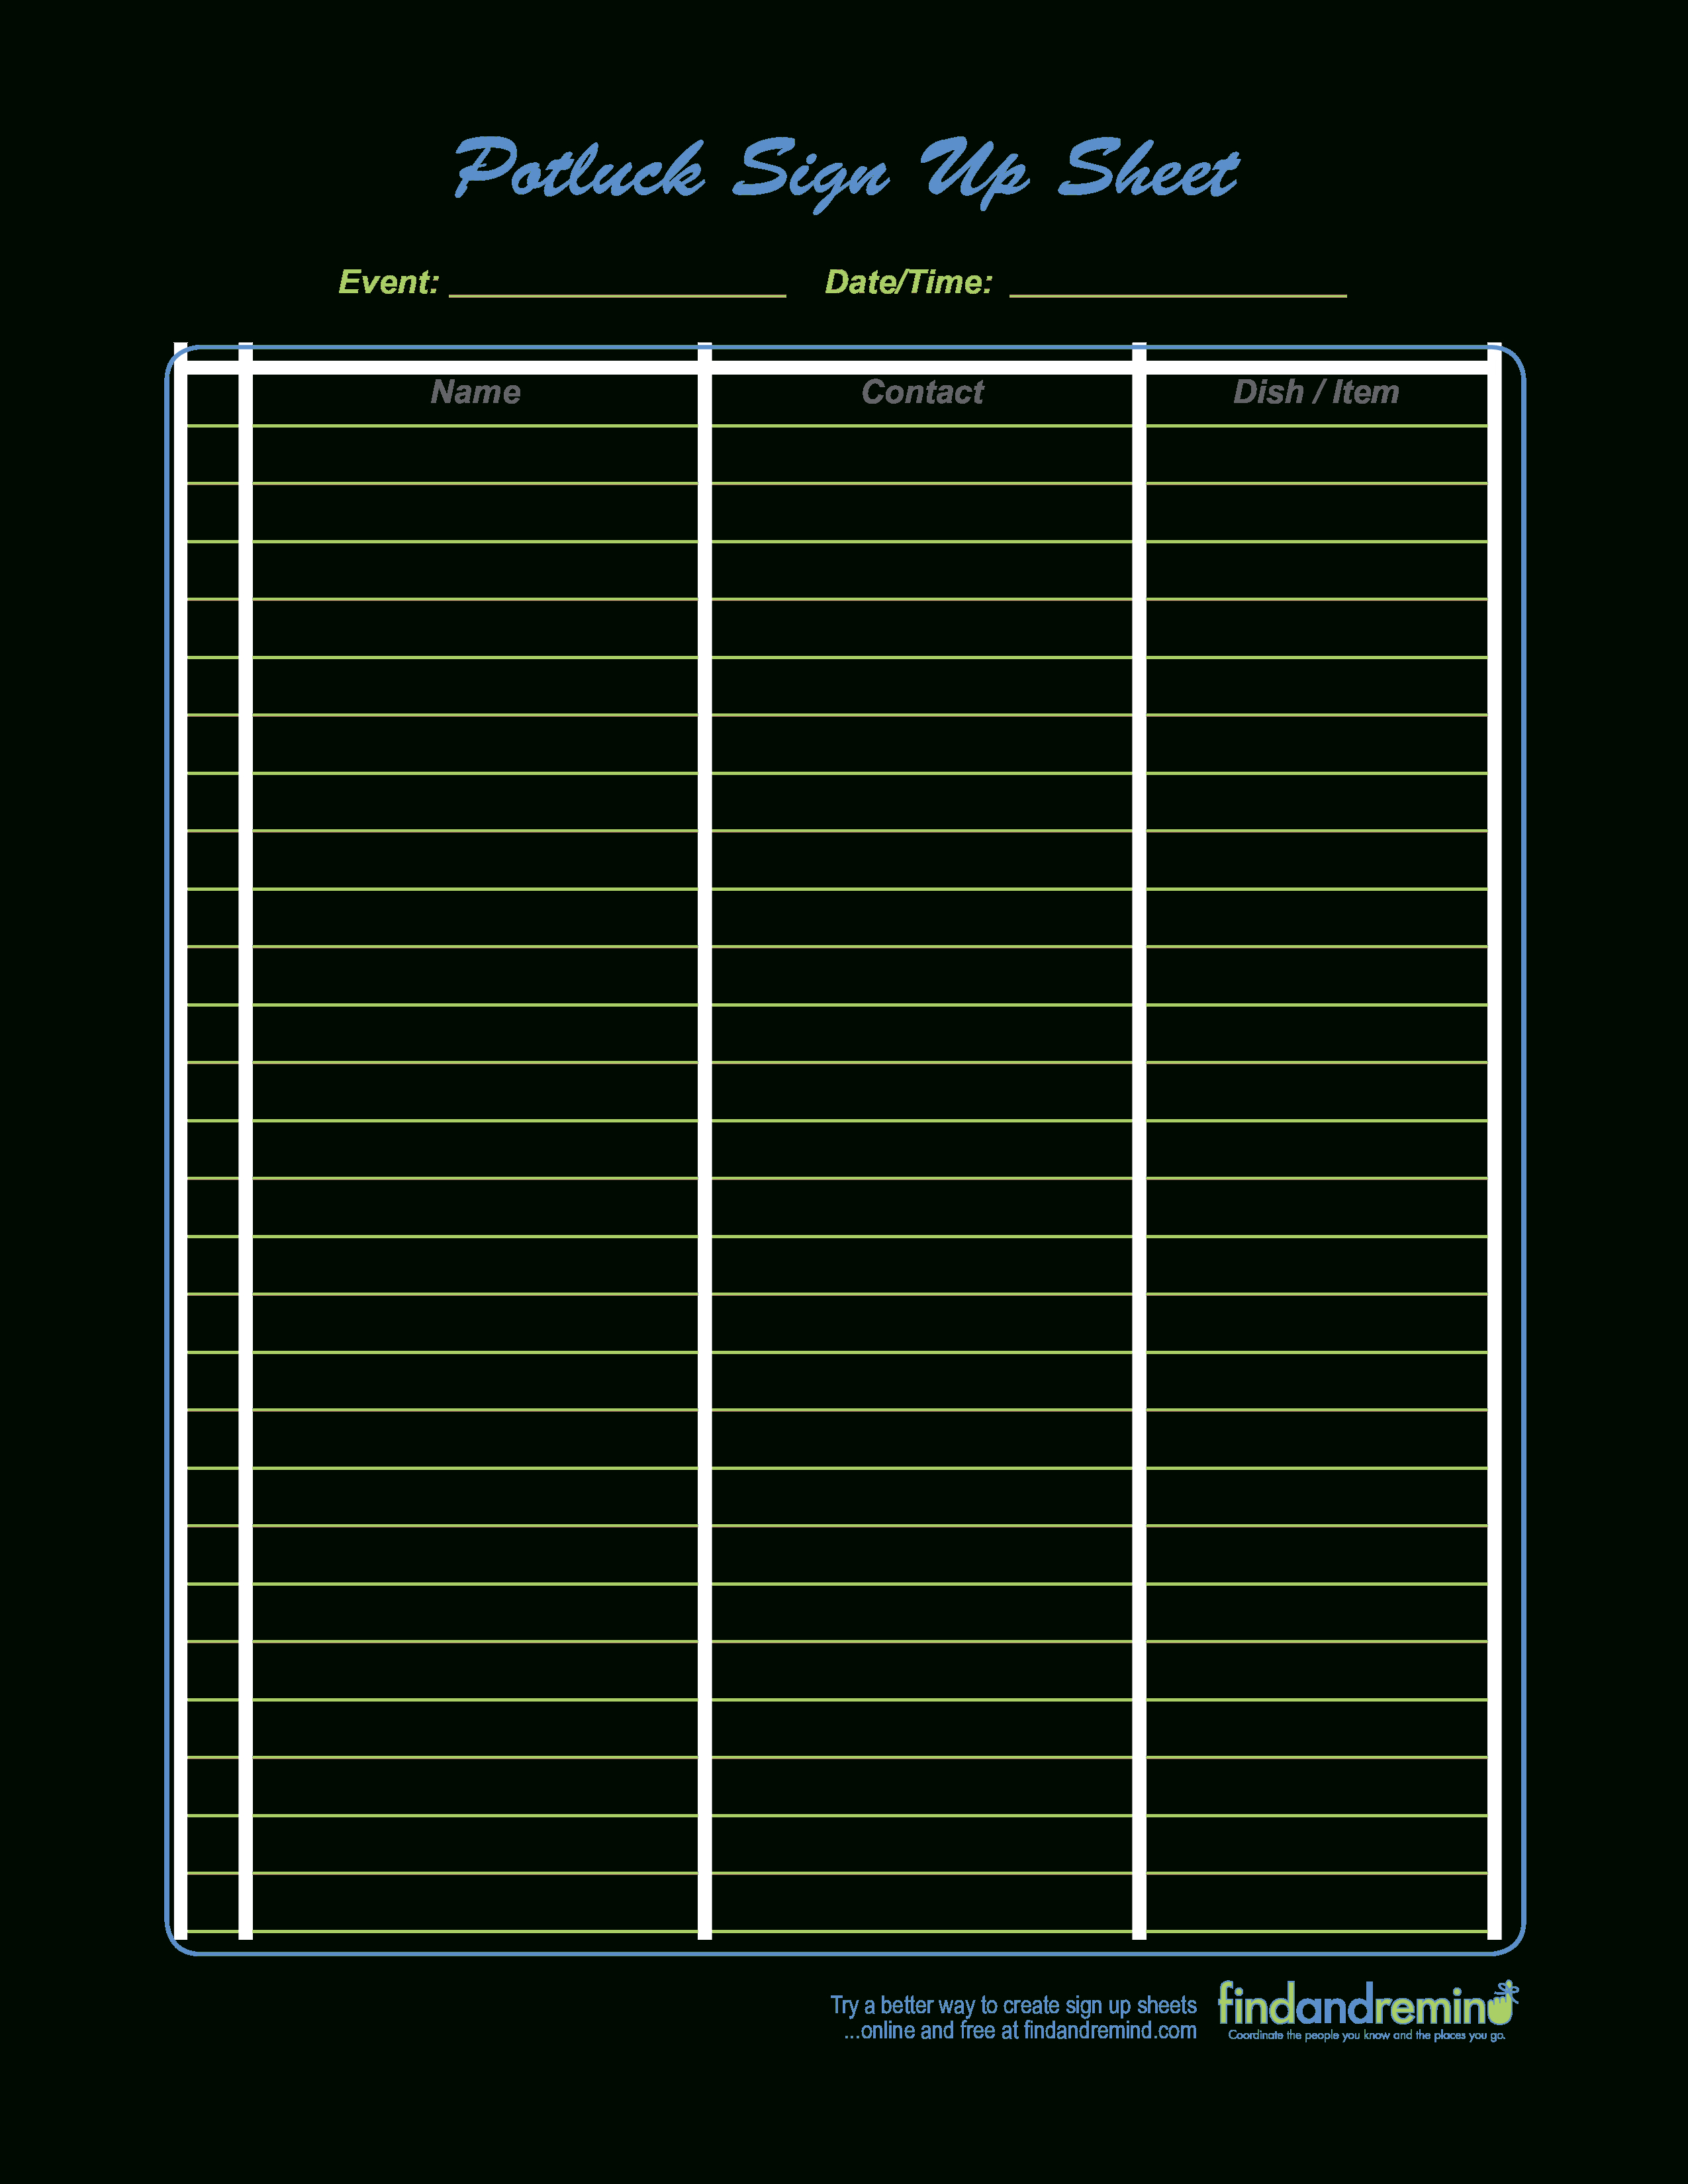 Sign Up Sheet For Potluck Unique Work Potluck Signup Sheet - Free Printable Sign Up Sheets For Potlucks